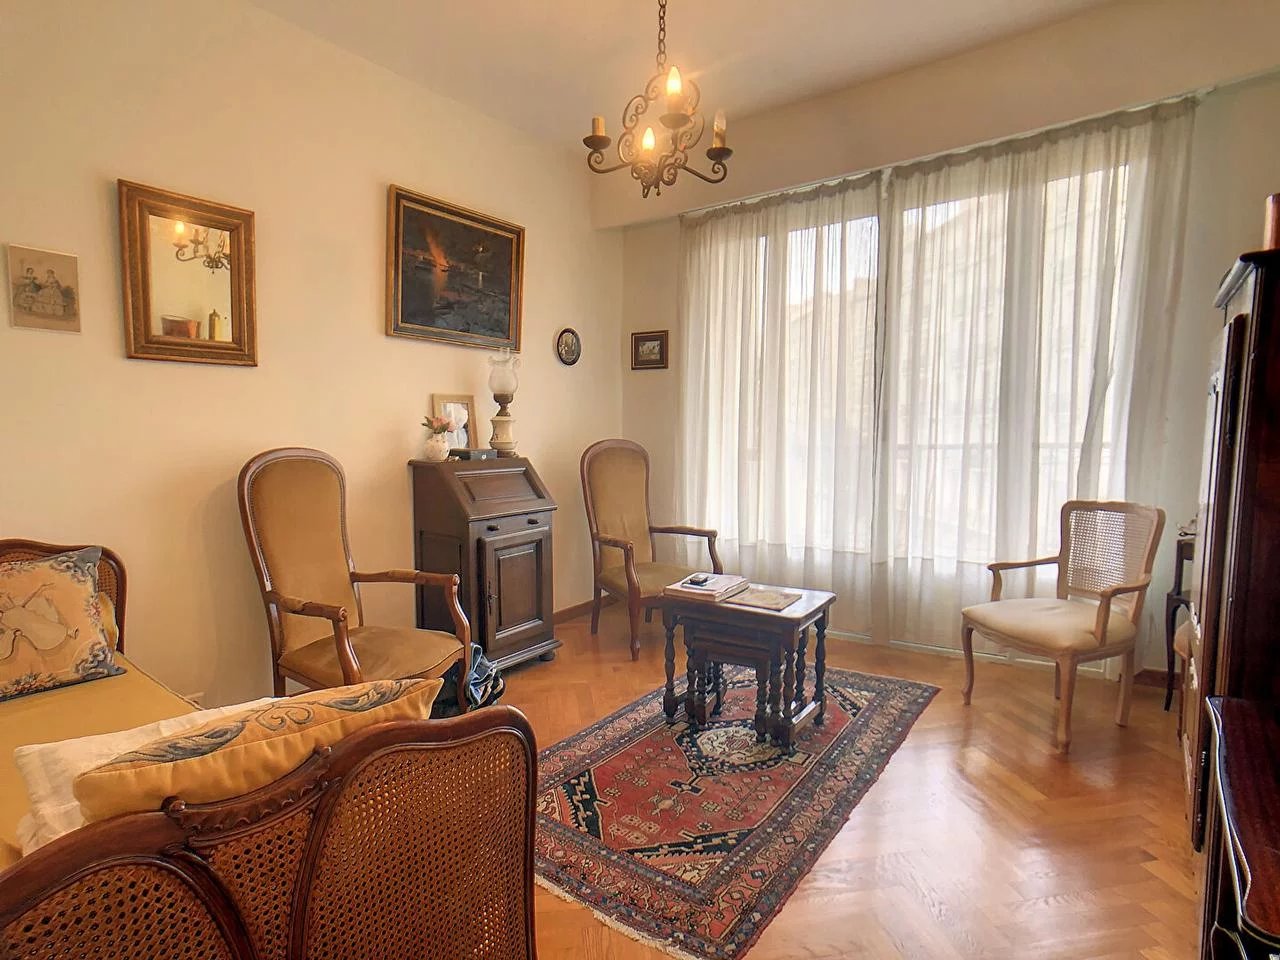 Appartement  3 Rooms 61.78m2  for sale   239 000 €